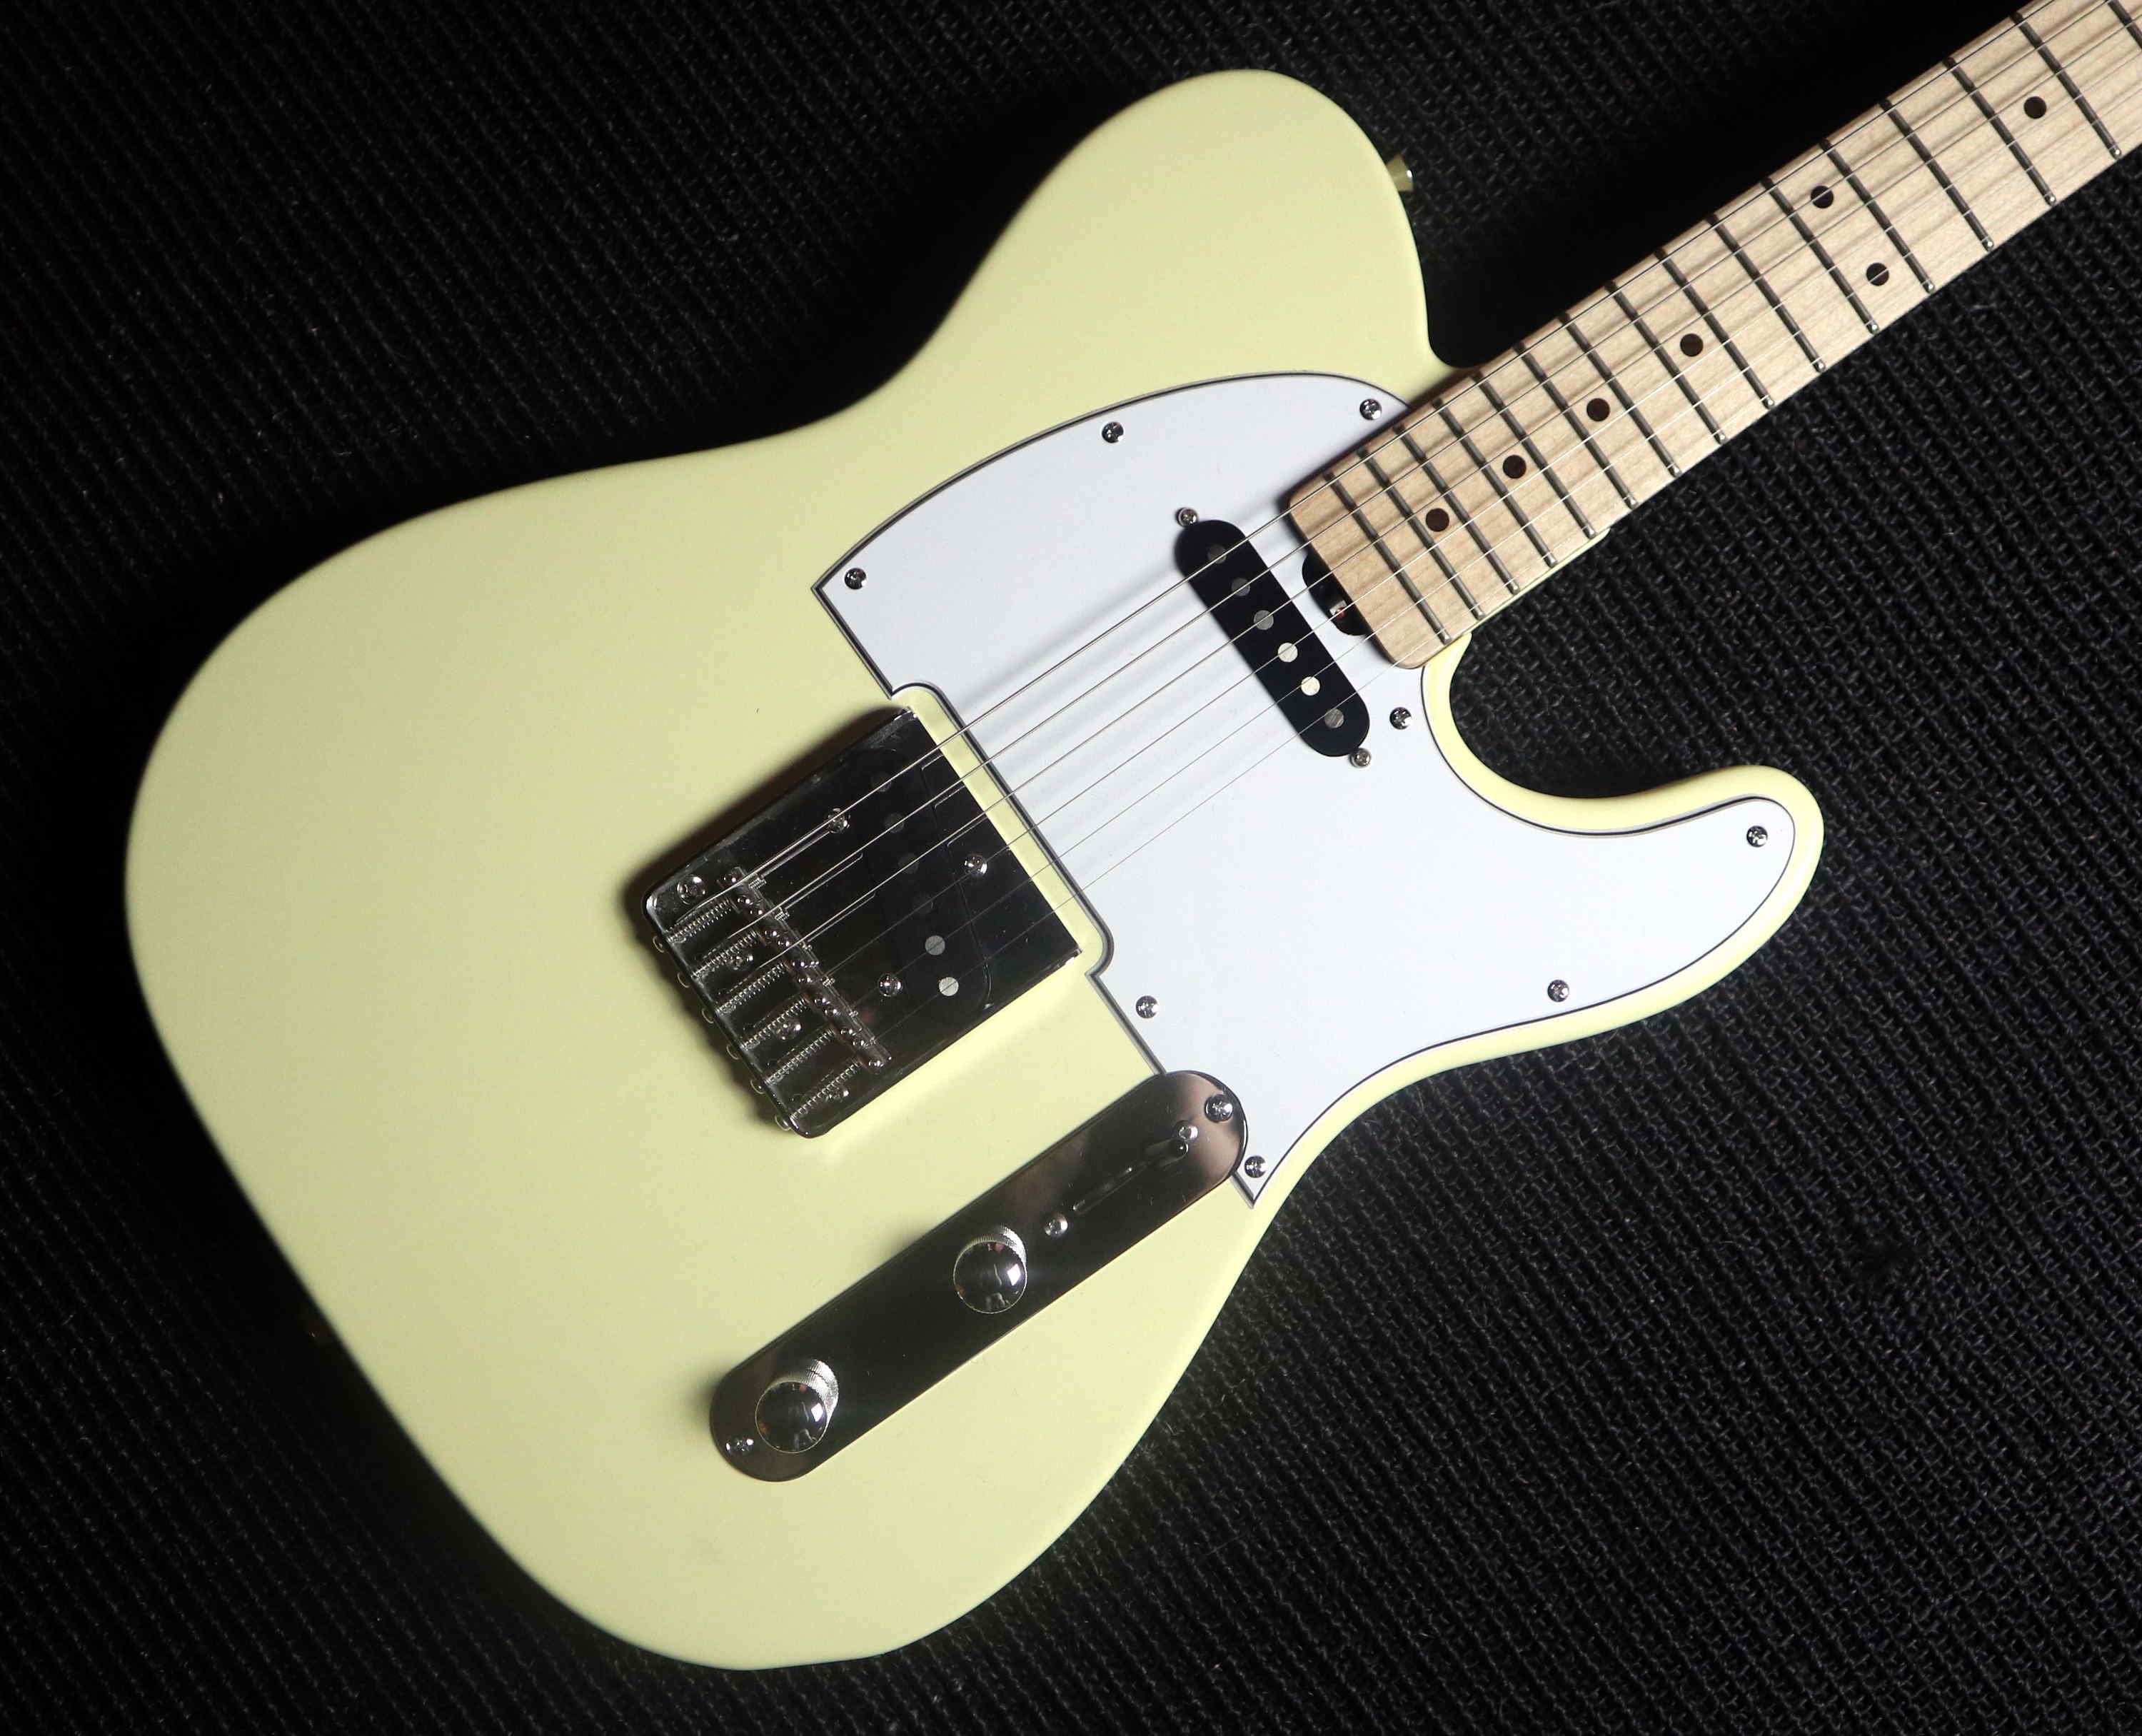 Gordon Smith Classic T Satin Yellow Maple Neck, Electric Guitar for sale at Richards Guitars.